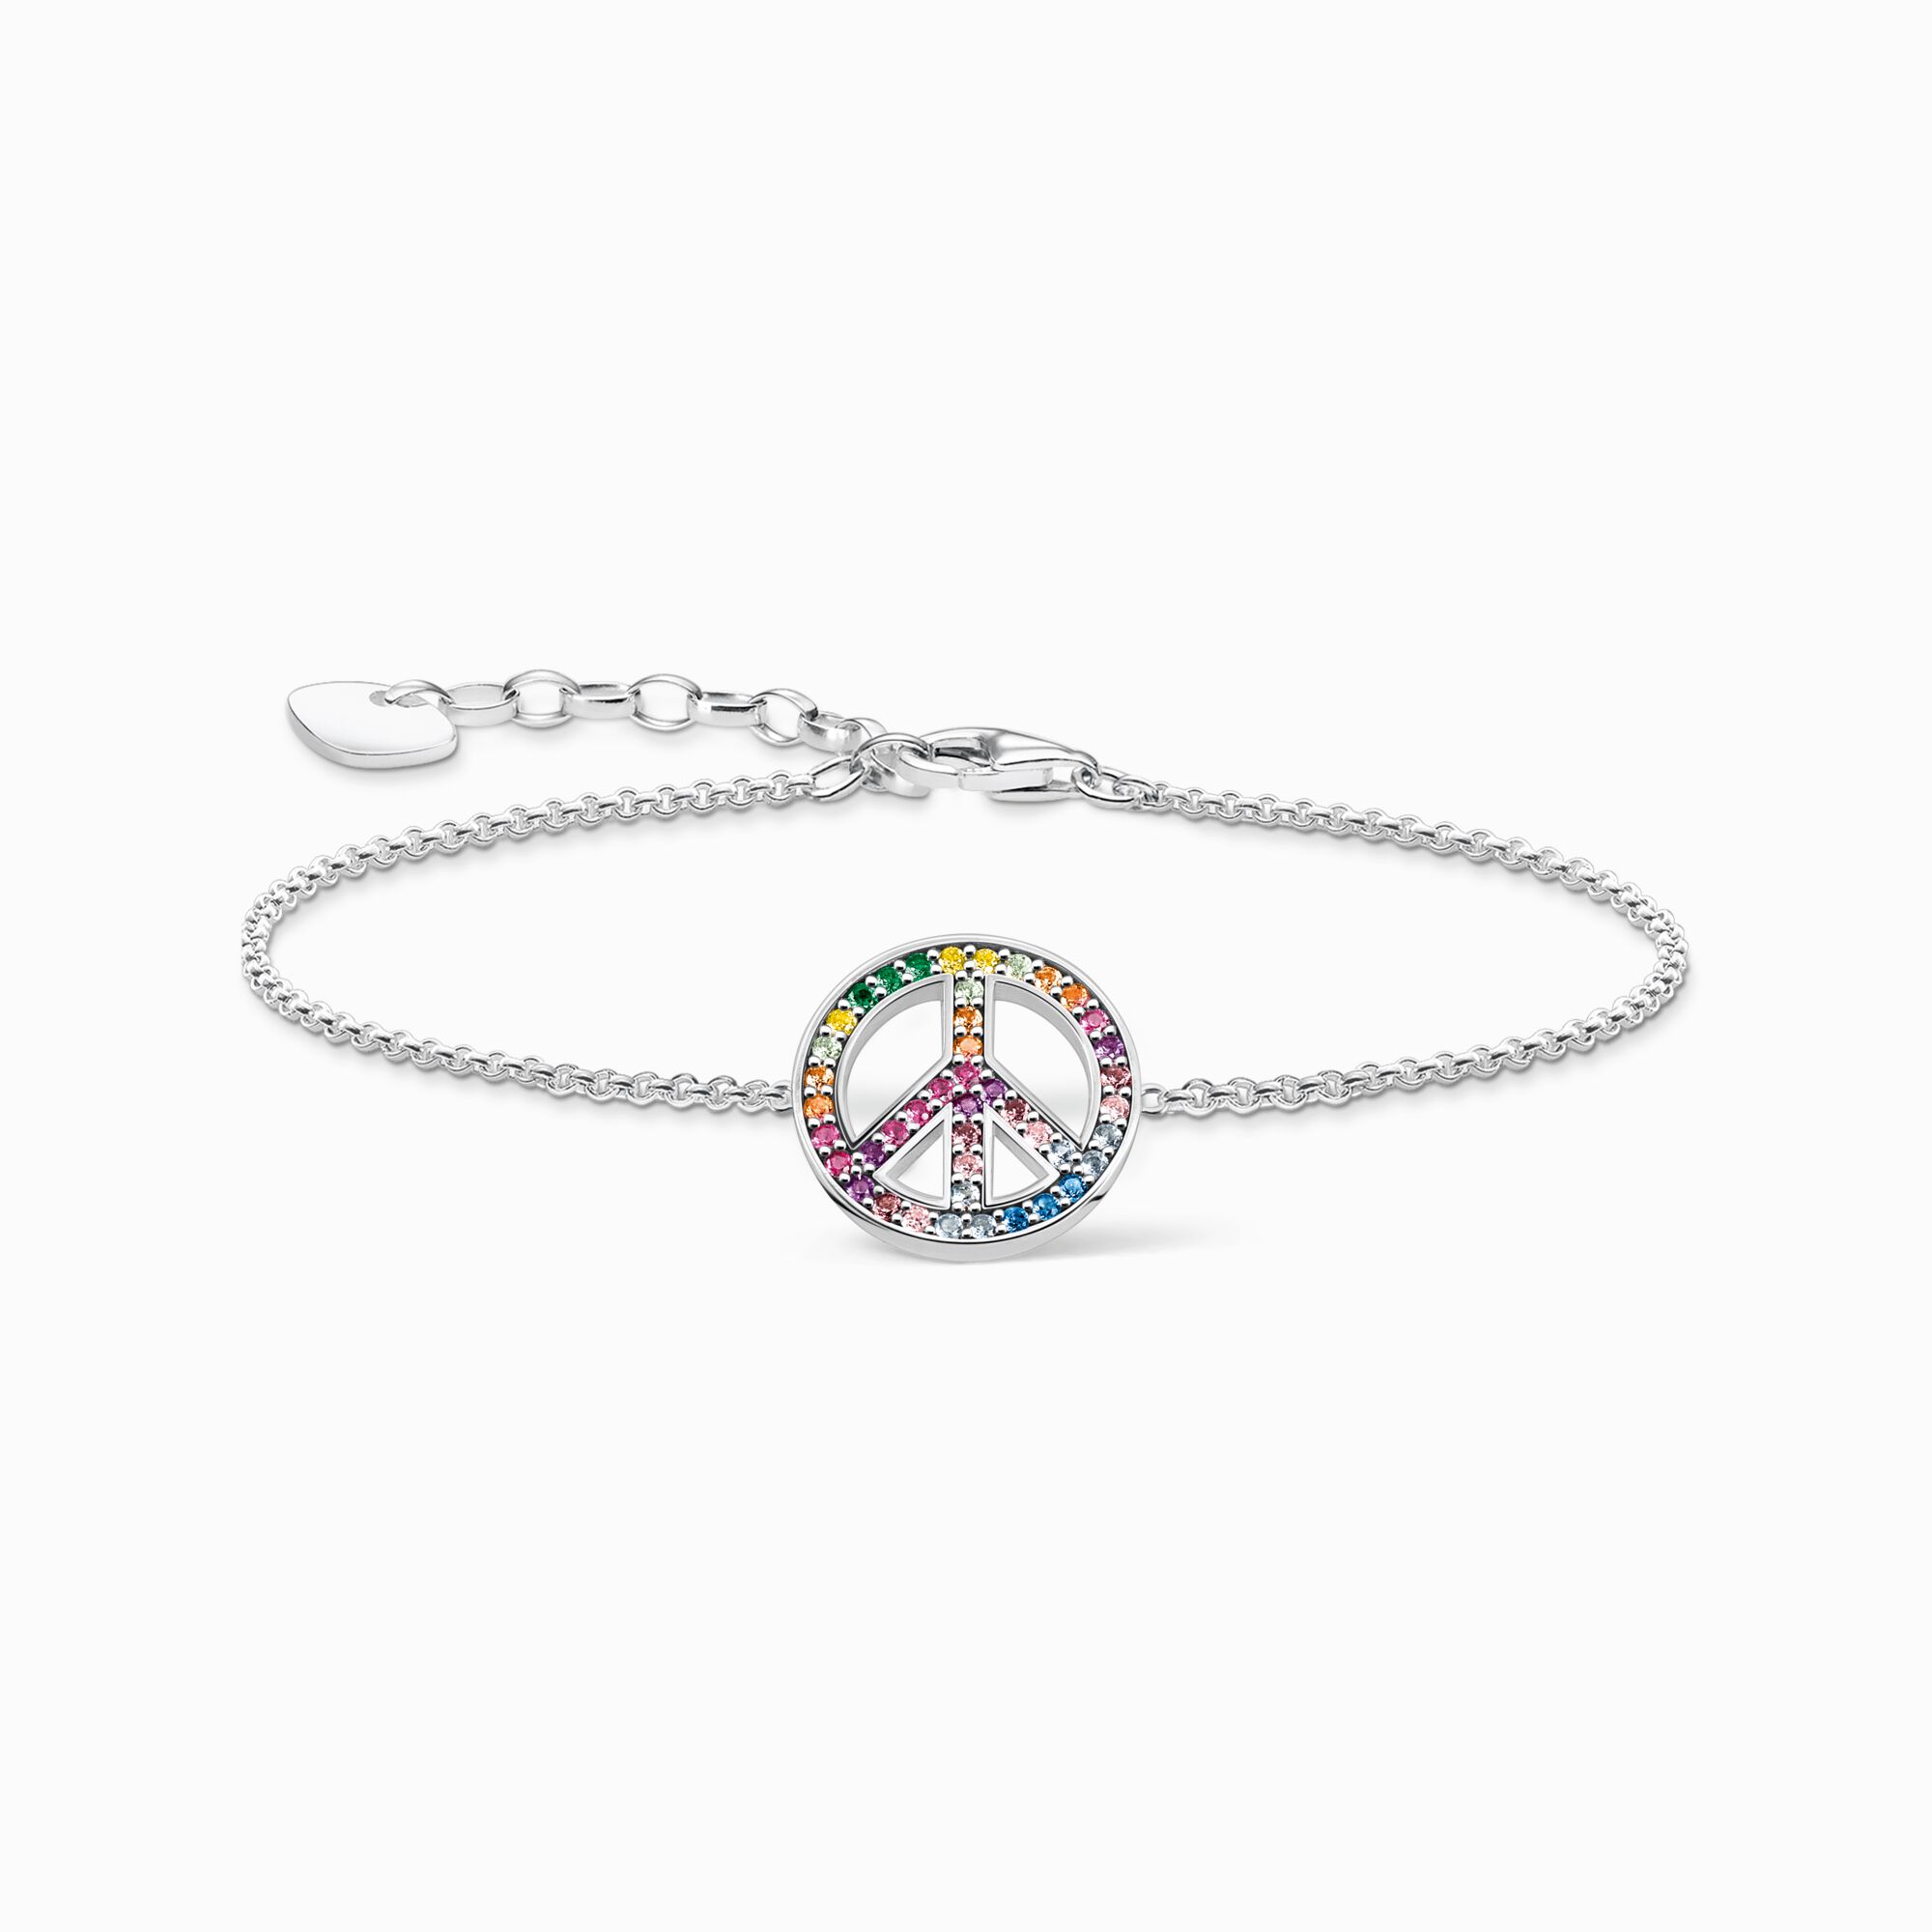 Blackened silver bracelet with peace sign and coloured stones from the  collection in the THOMAS SABO online store